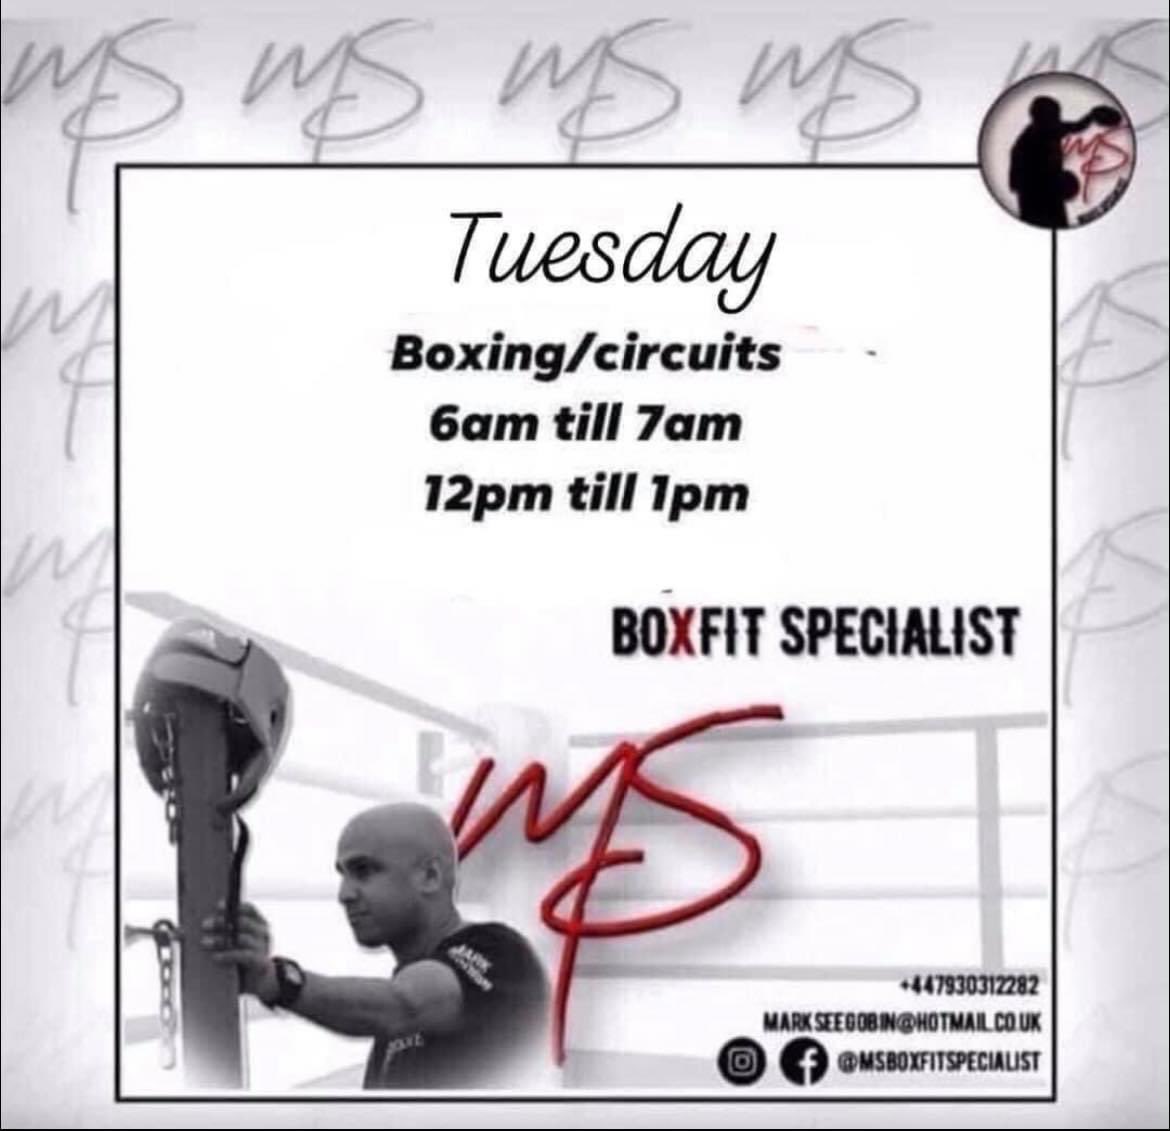 Marks Tuesday sessions £5 Circuit training, bag station, pad work and full use of the gym “resistance and cardio” Aimed at all levels of fitness and boxing All sessions are mixed TJ’s Evolve Boxing Gym, Morley LS27 0QH #boxing #fitness #gym